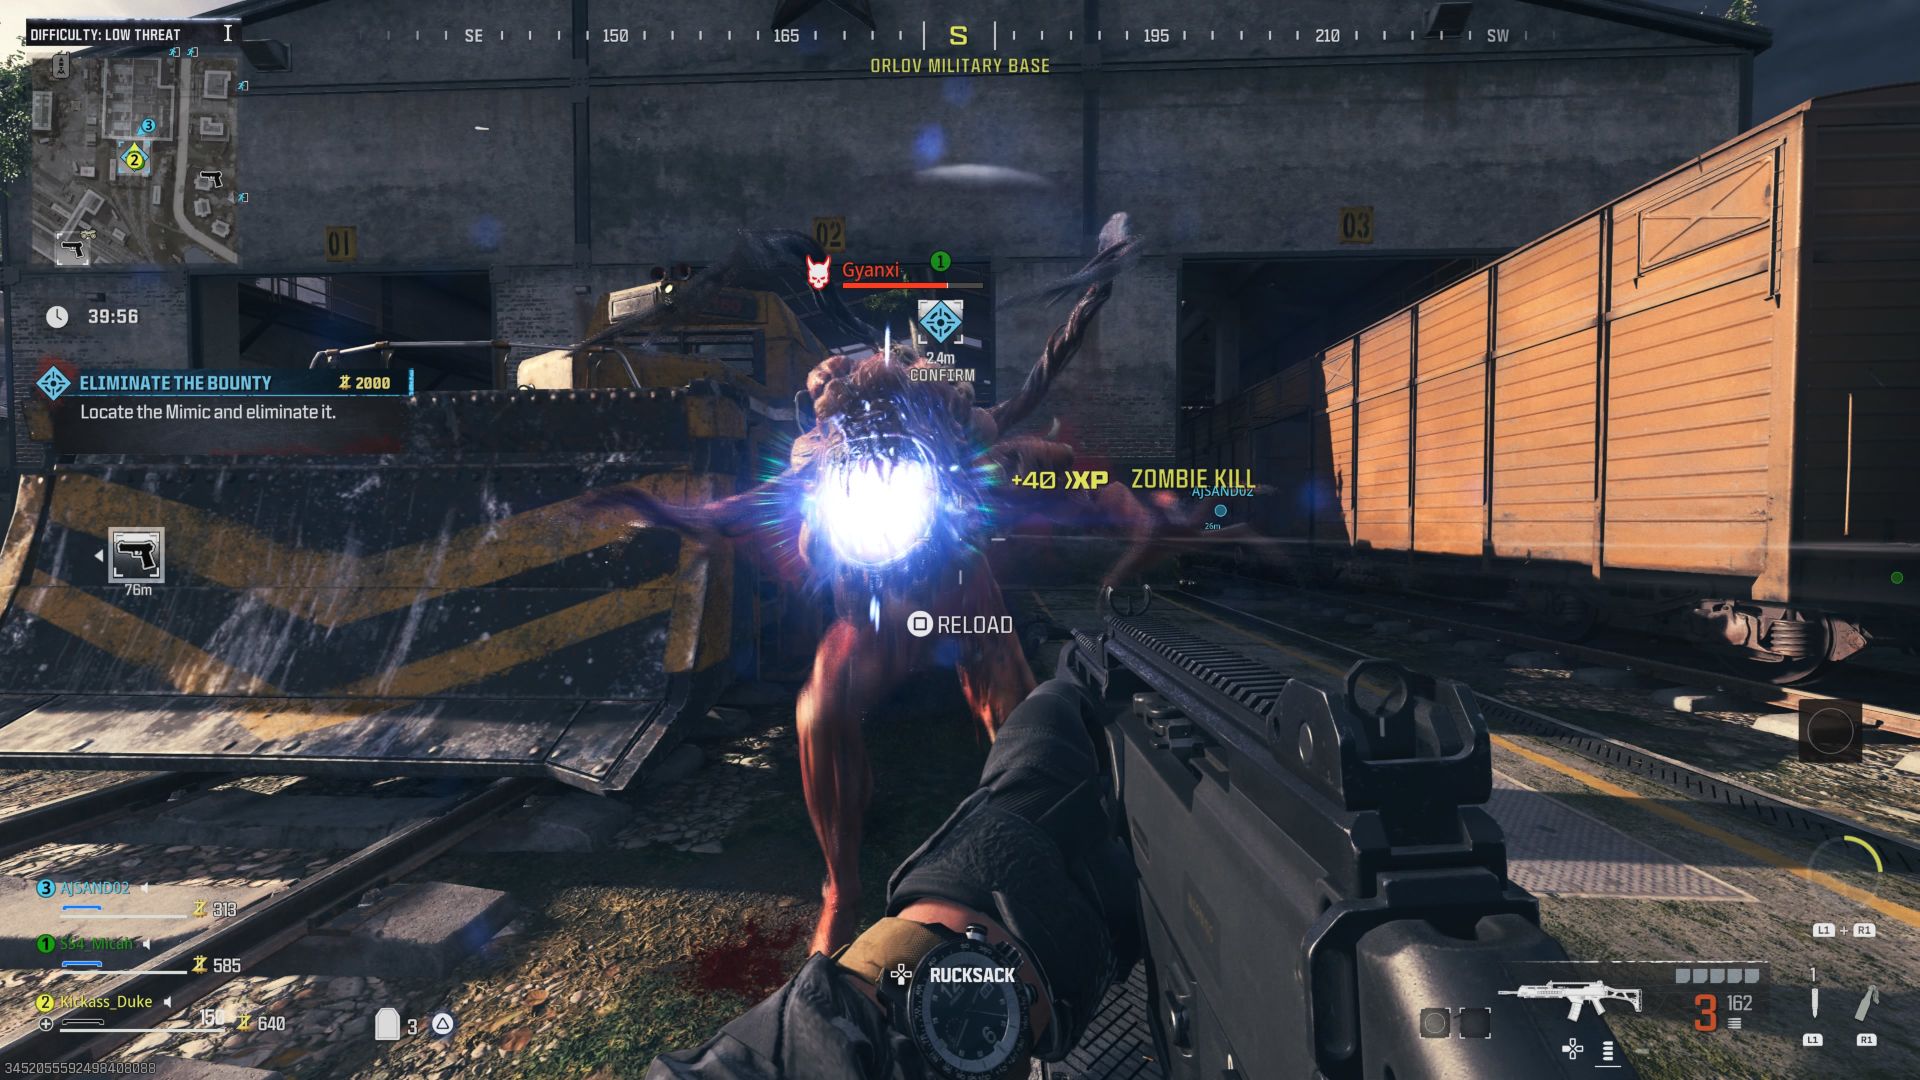 Screenshot from Call of Duty Modern Warefare 3 Zombie mode shows a mimic boss running towards the player with a bring glowing light in it's center and fleshy tendrils outstretched.